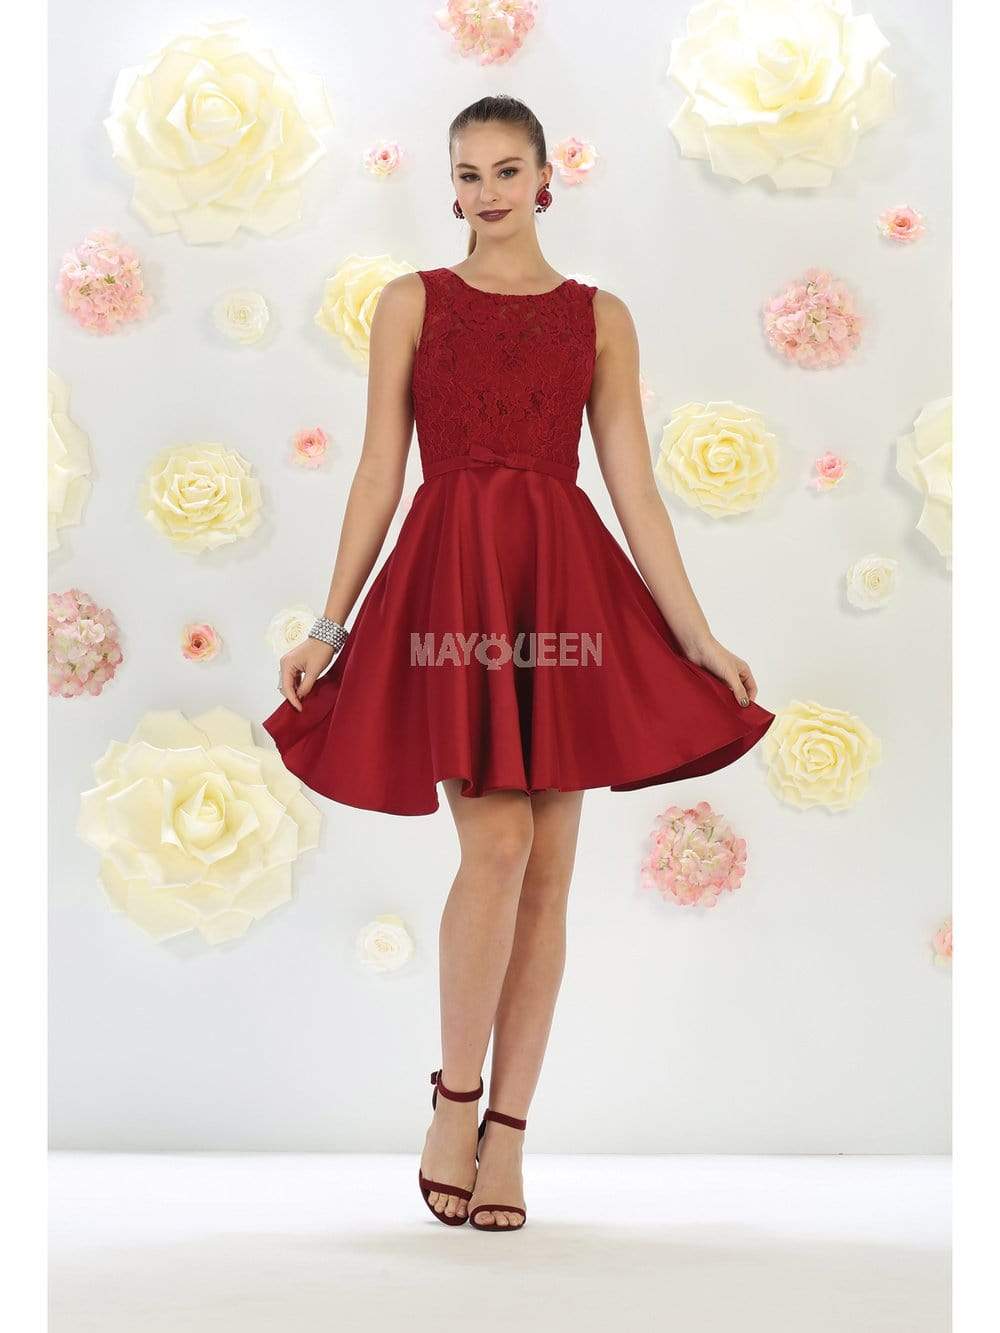 May Queen - MQ1268 Illusion Two Piece Lace and Tulle Cocktail Dress Homecoming Dresses 2 / Burgundy